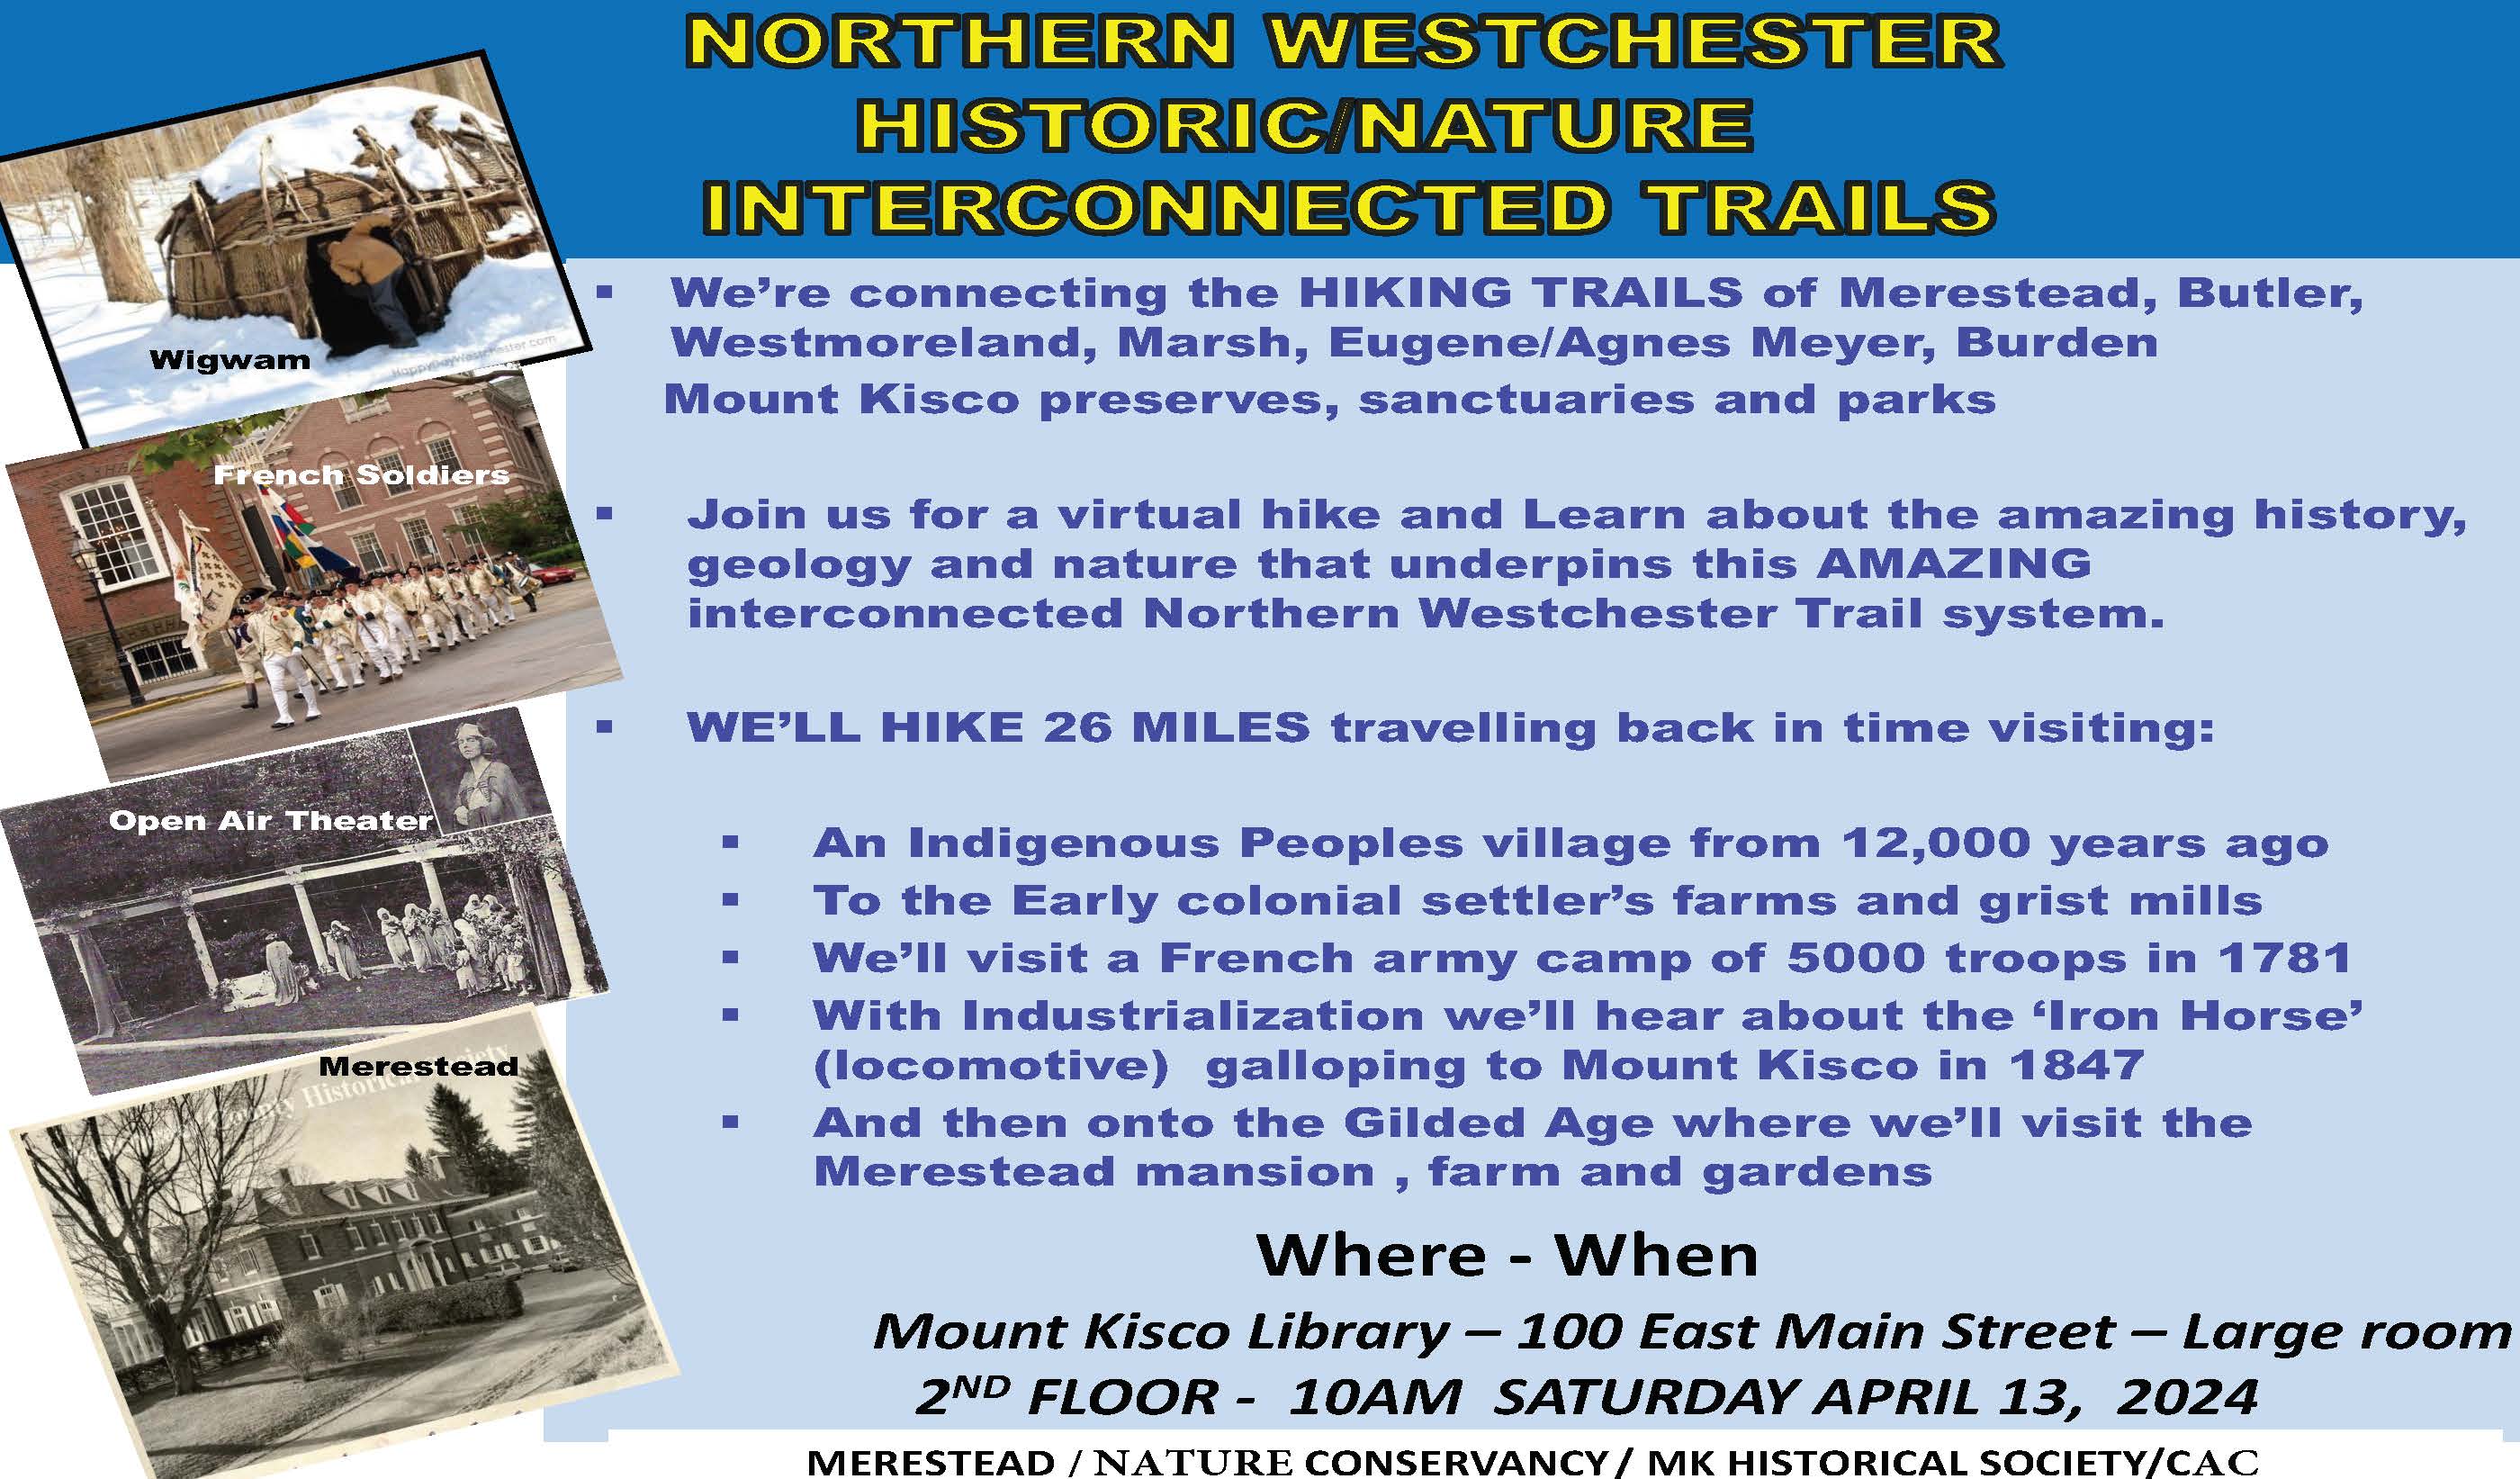 NORTHERN WESTCHESTER - INTERCONNECTED TRAIL SYSTEM - FLYER (003)